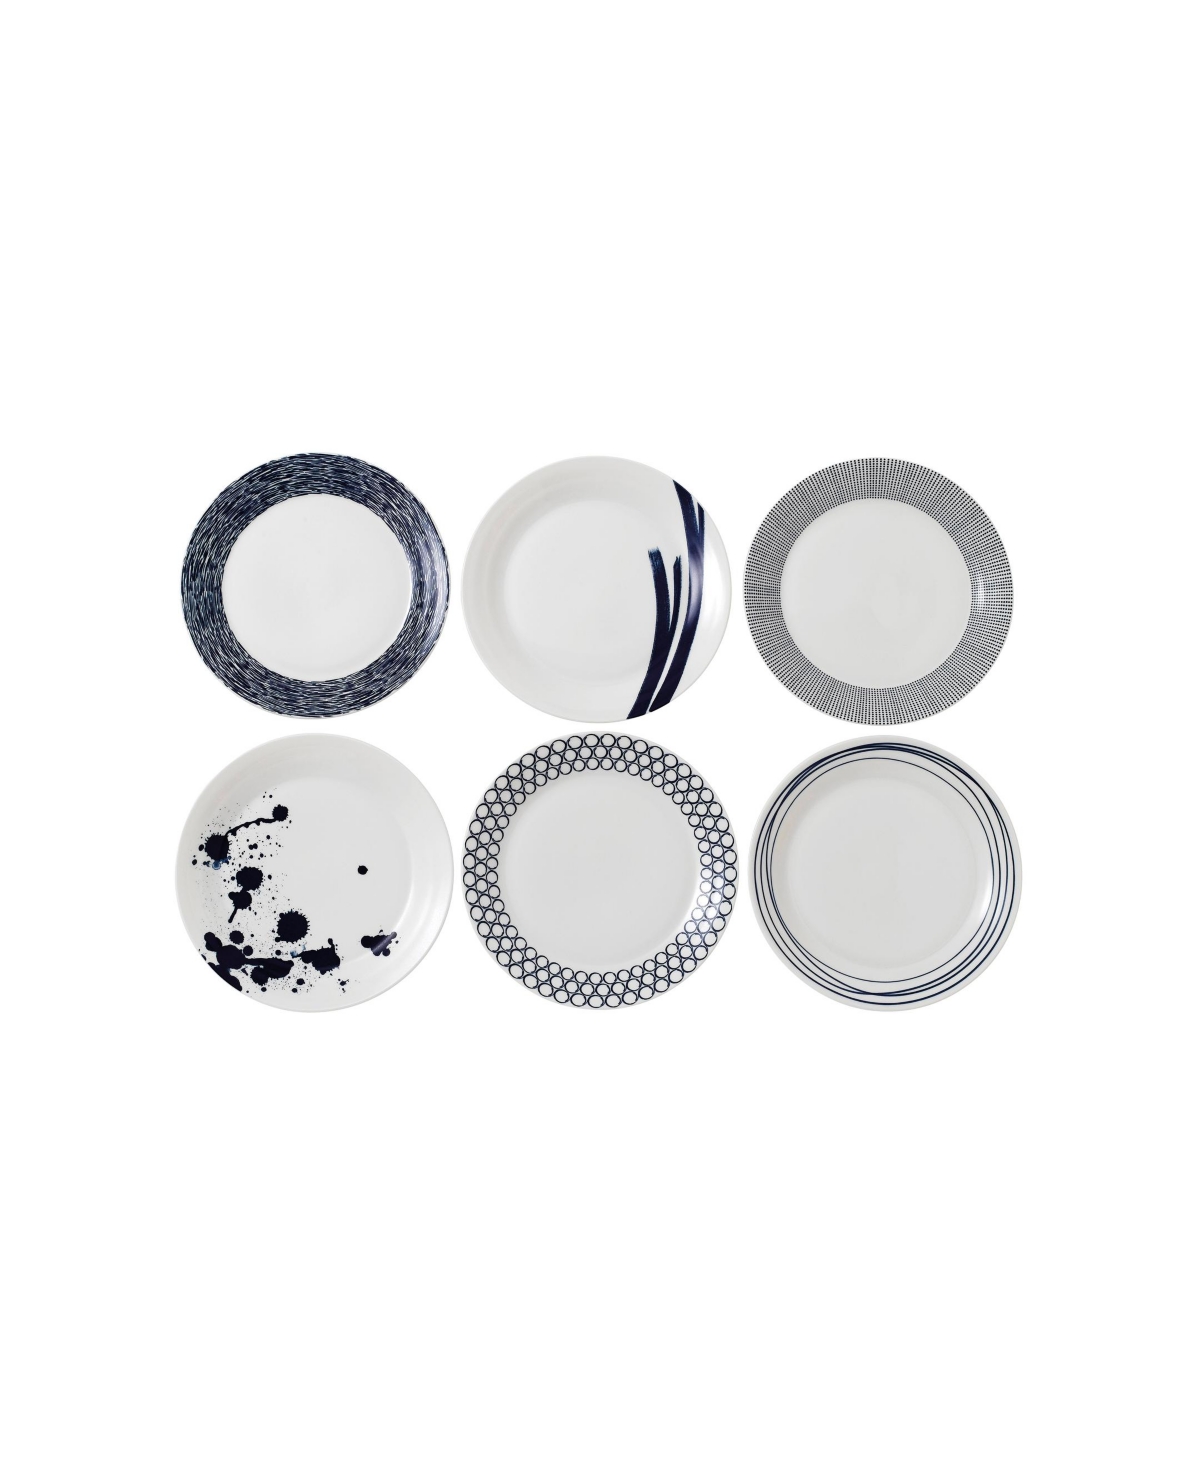 Pacific Set/6 Mixed Dinner Plate - Multi